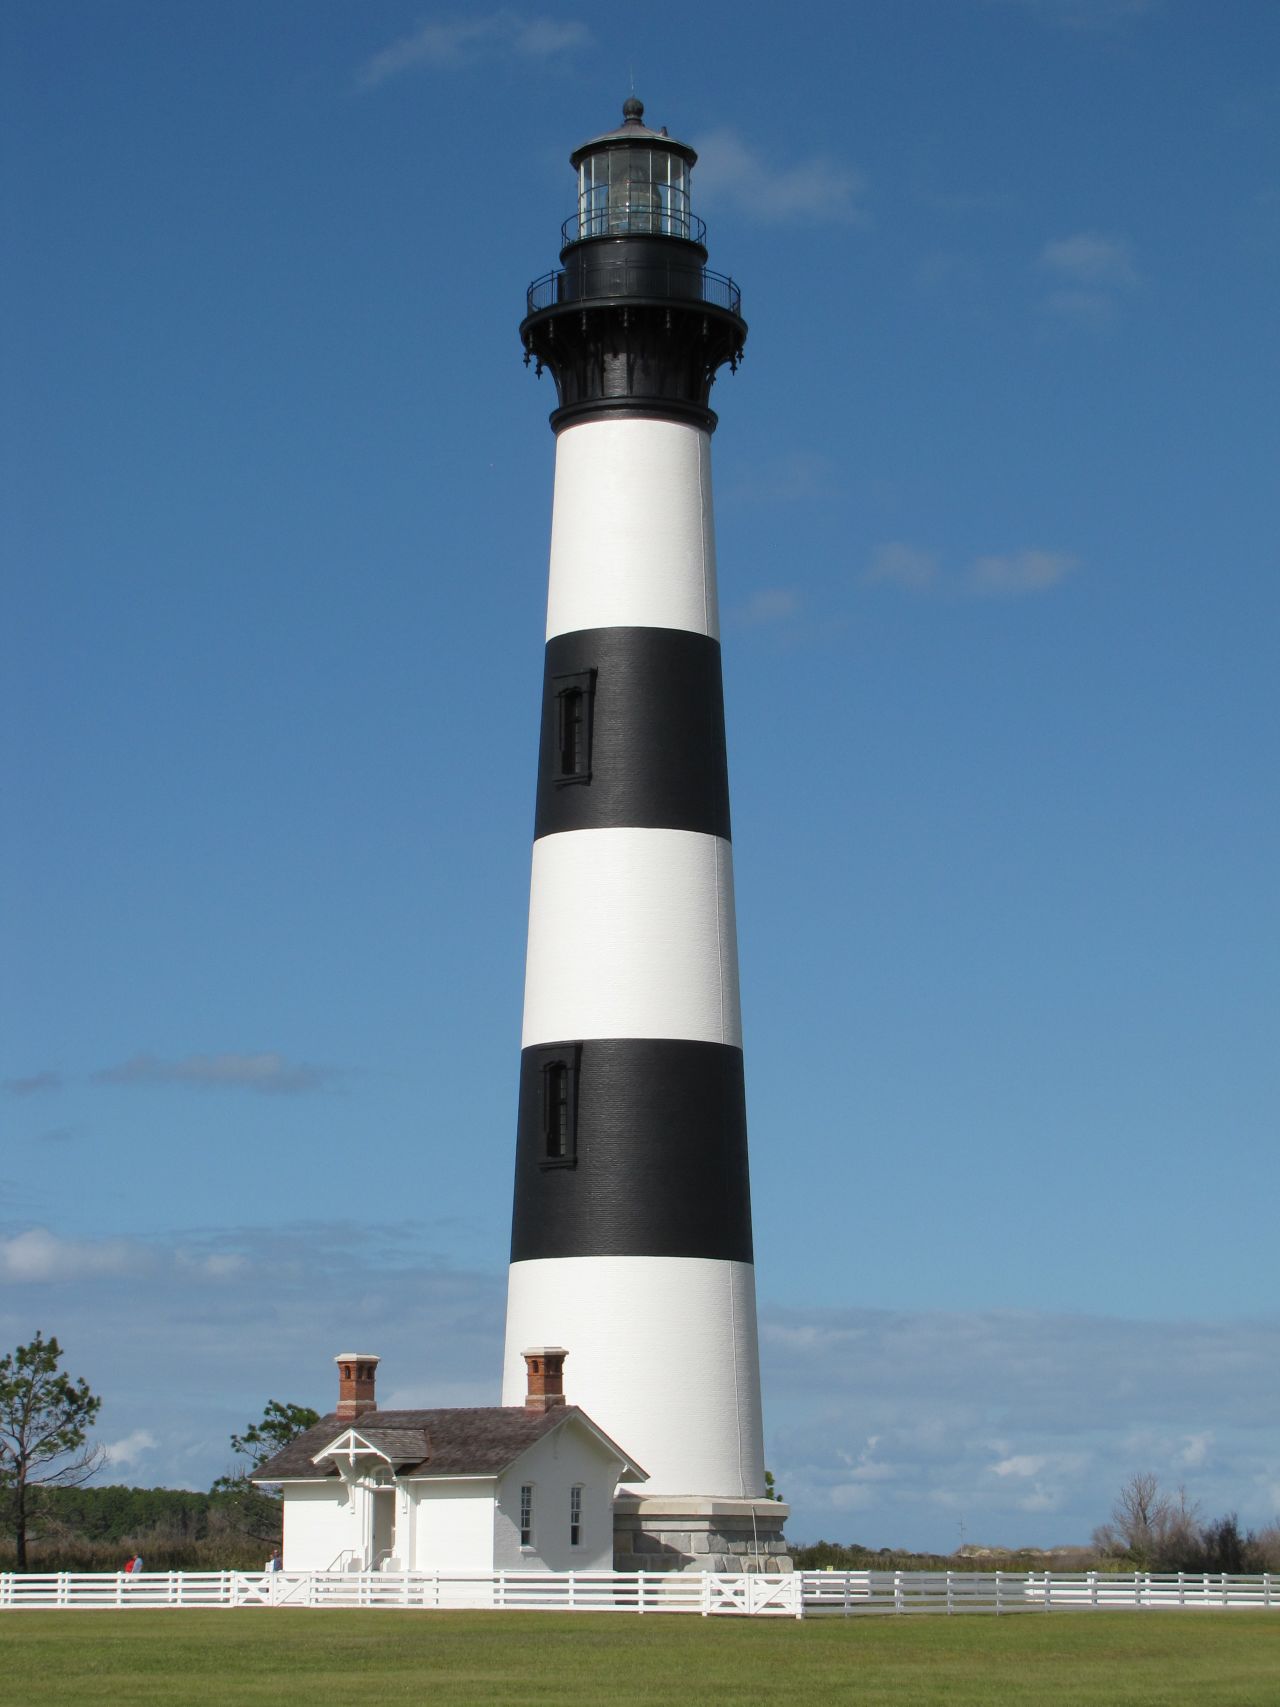 <a href="http://ireport.cnn.com/docs/DOC-1159187">Justin Wolfe</a> called it a treat to be able to view the powerful lens of the Bodie Lighthouse up close in Nags Head, North Carolina.